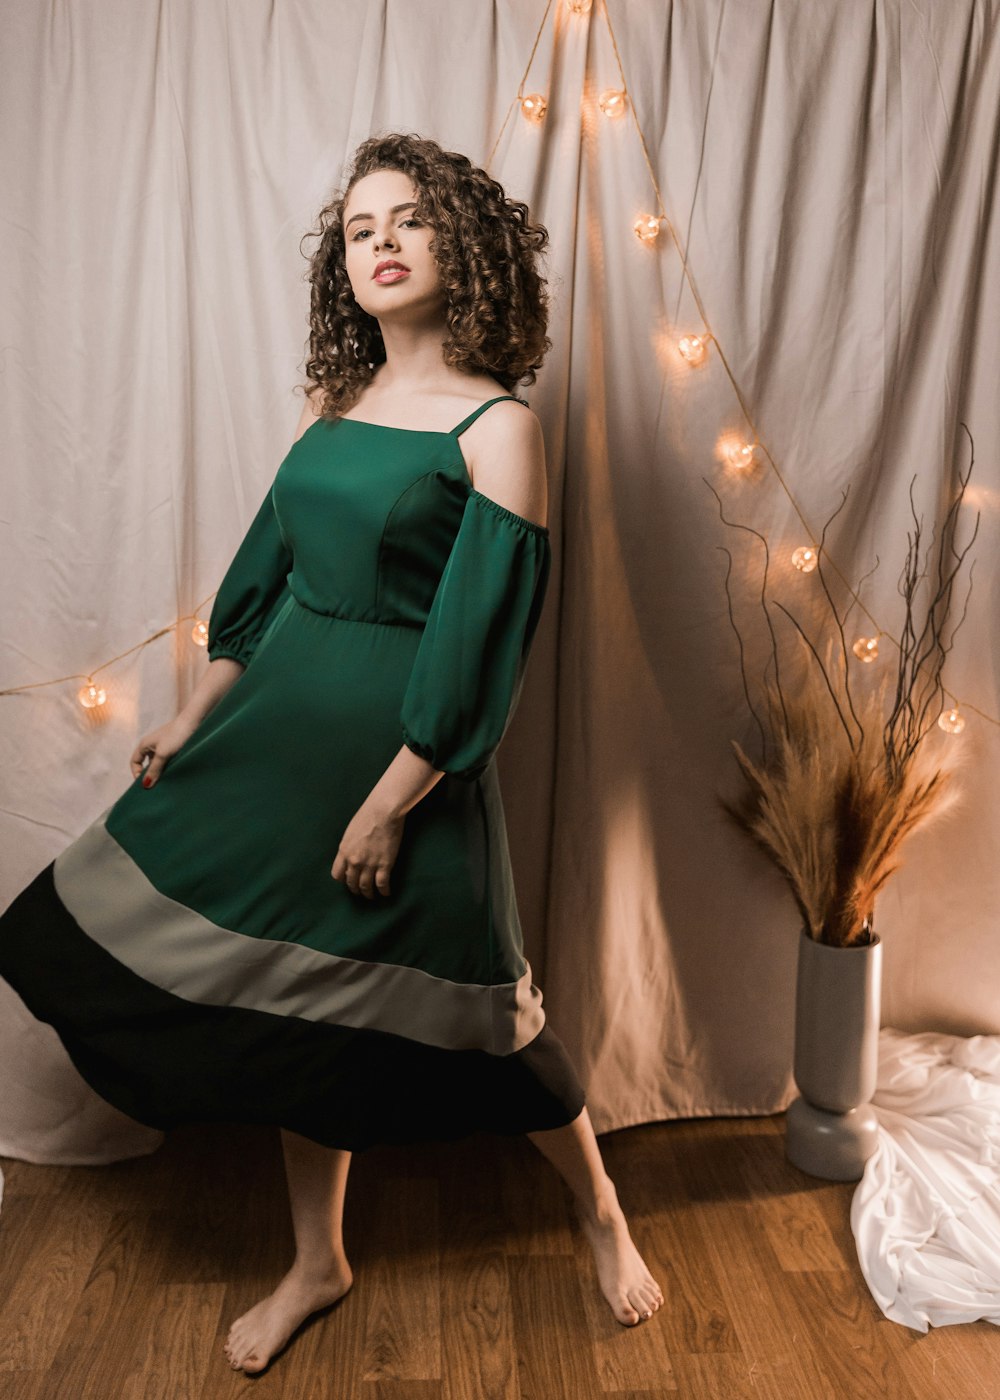 Green Dress Pictures | Download Free Images on Unsplash